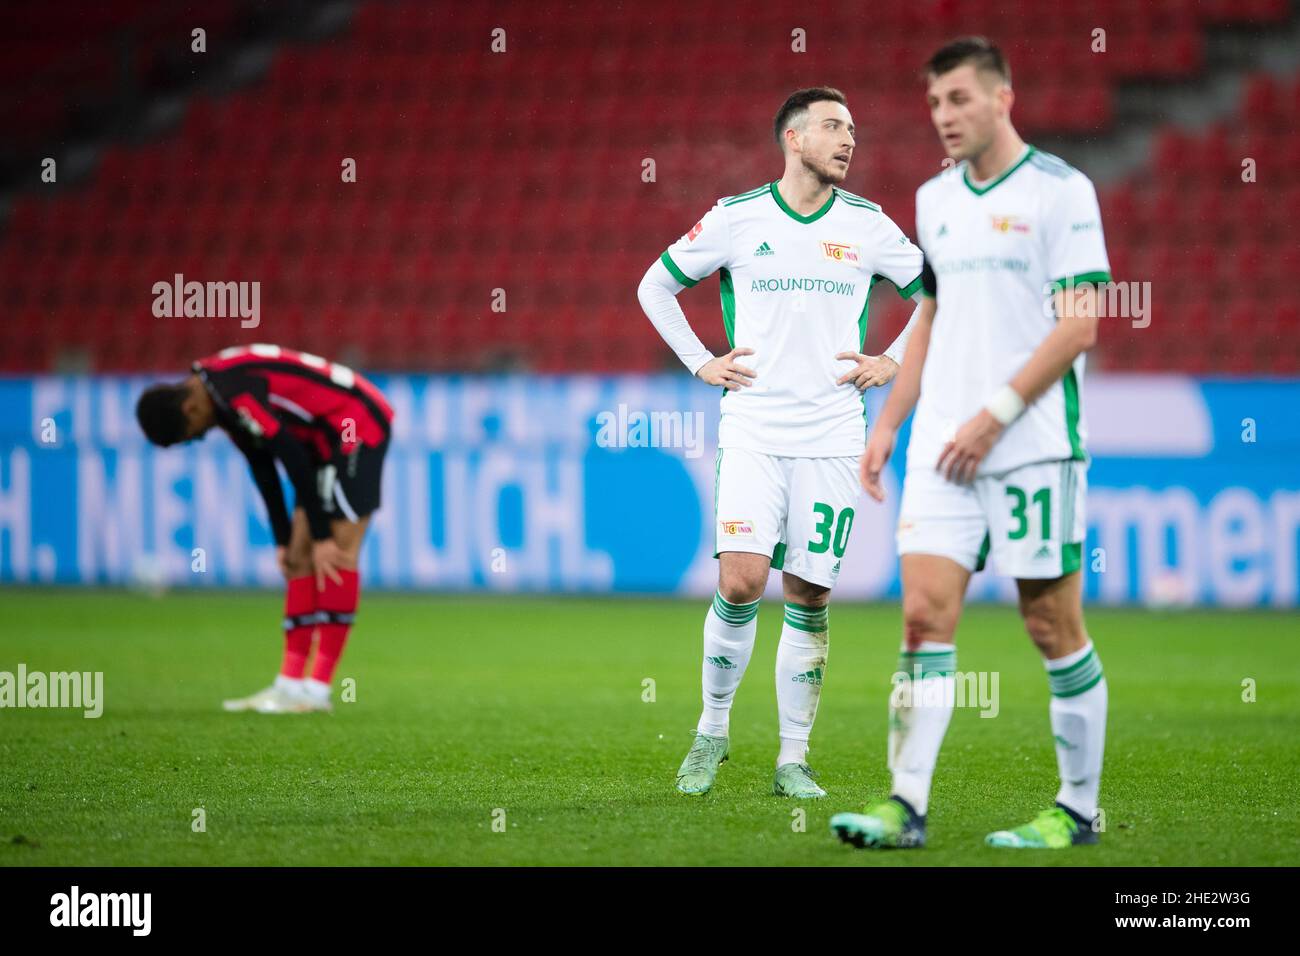 Leverkusen, Germany. 08th Jan, 2022. Soccer: Bundesliga, Bayer Leverkusen - 1. FC Union Berlin, Matchday 18, BayArena. Berlin's Kevin Möhwald (center) reacts after the match. Credit: Marius Becker/dpa - IMPORTANT NOTE: In accordance with the requirements of the DFL Deutsche Fußball Liga and the DFB Deutscher Fußball-Bund, it is prohibited to use or have used photographs taken in the stadium and/or of the match in the form of sequence pictures and/or video-like photo series./dpa/Alamy Live News Stock Photo